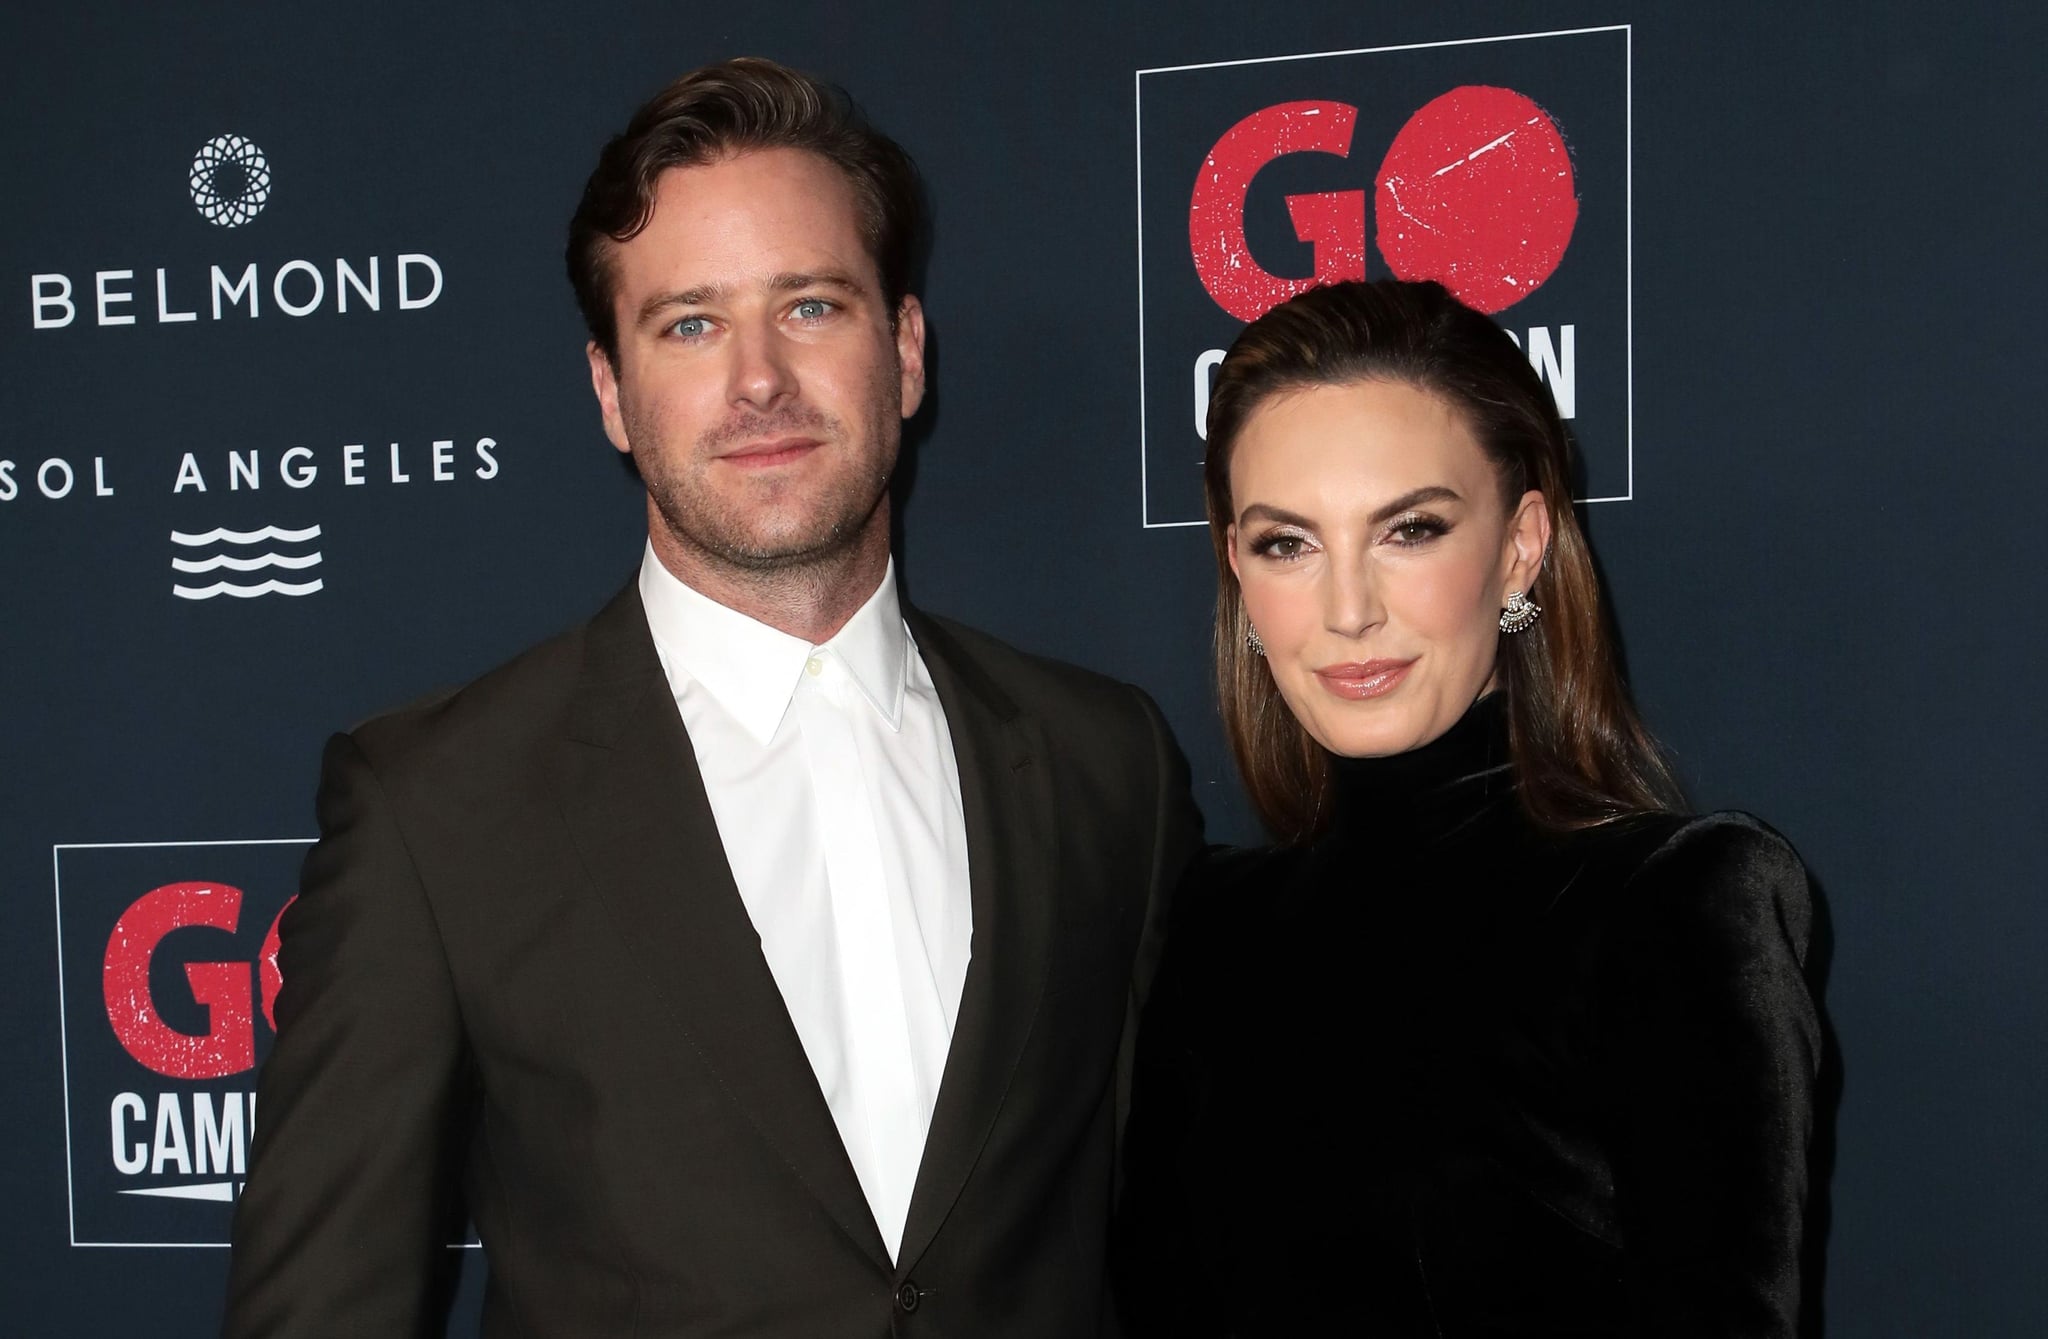 LOS ANGELES, CALIFORNIA - NOVEMBER 16: Armie Hammer and  Elizabeth Chambers attend the Go Campaign's 13th Annual Go Gala at NeueHouse Hollywood on November 16, 2019 in Los Angeles, California. (Photo by David Livingston/Getty Images)